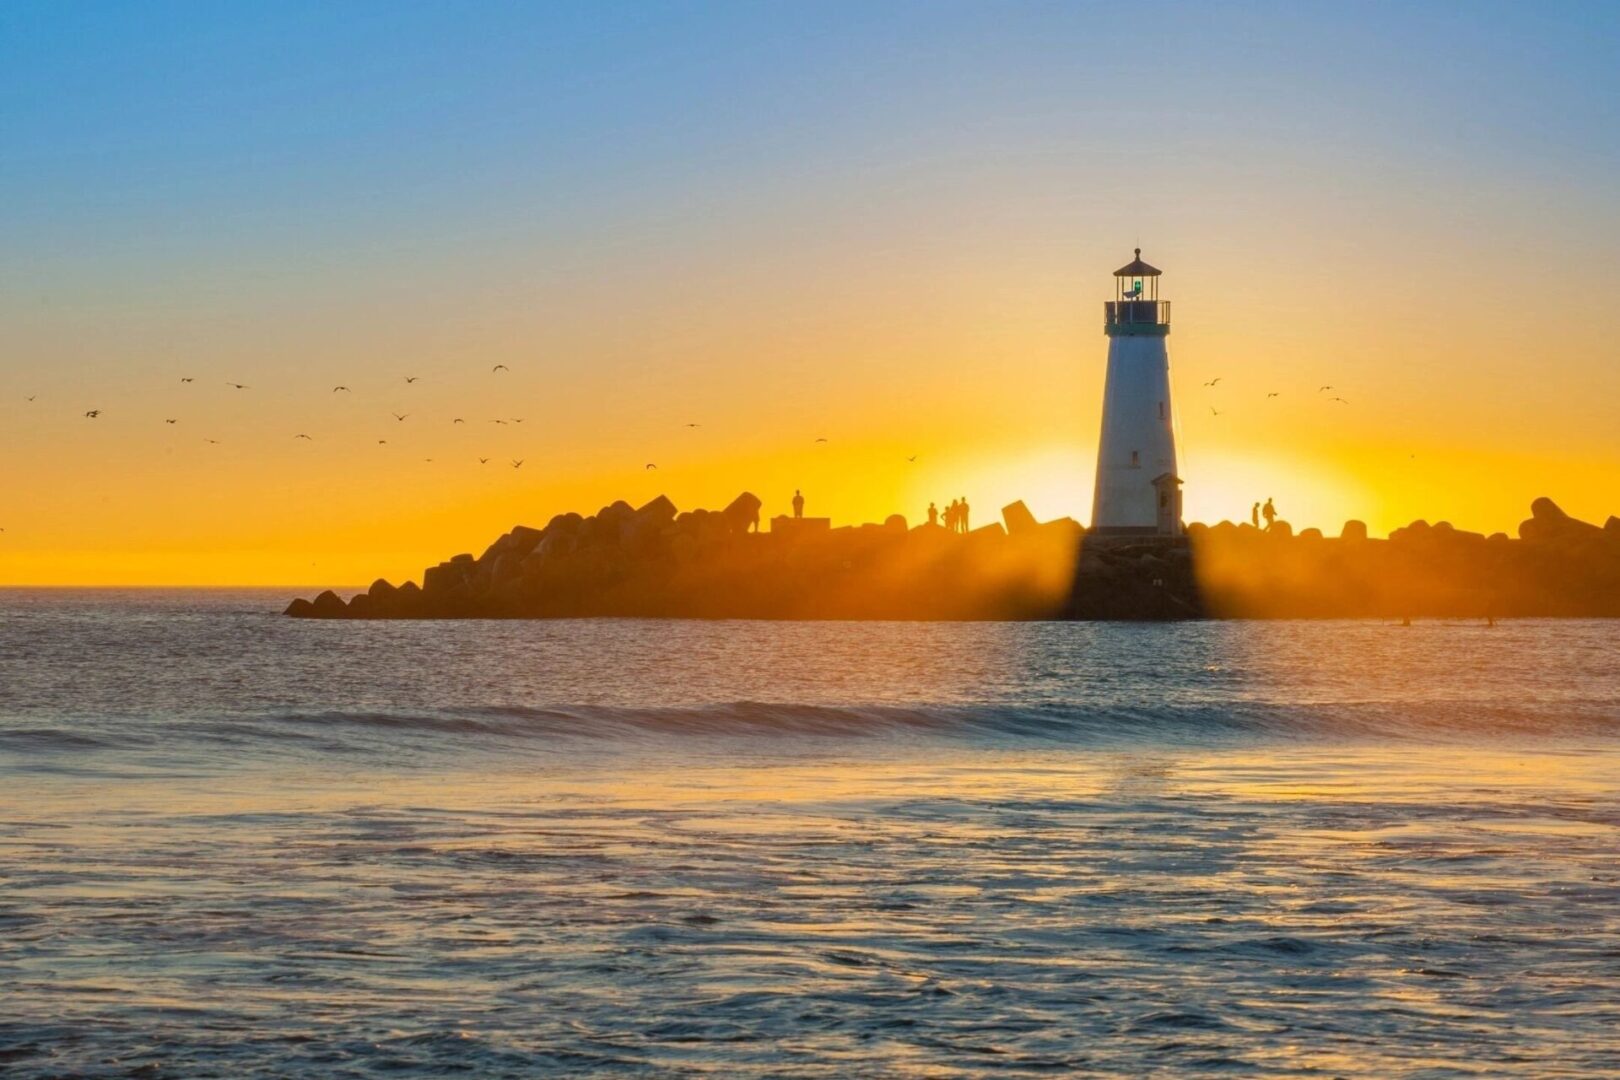 A lighthouse is shown at sunset on the water.